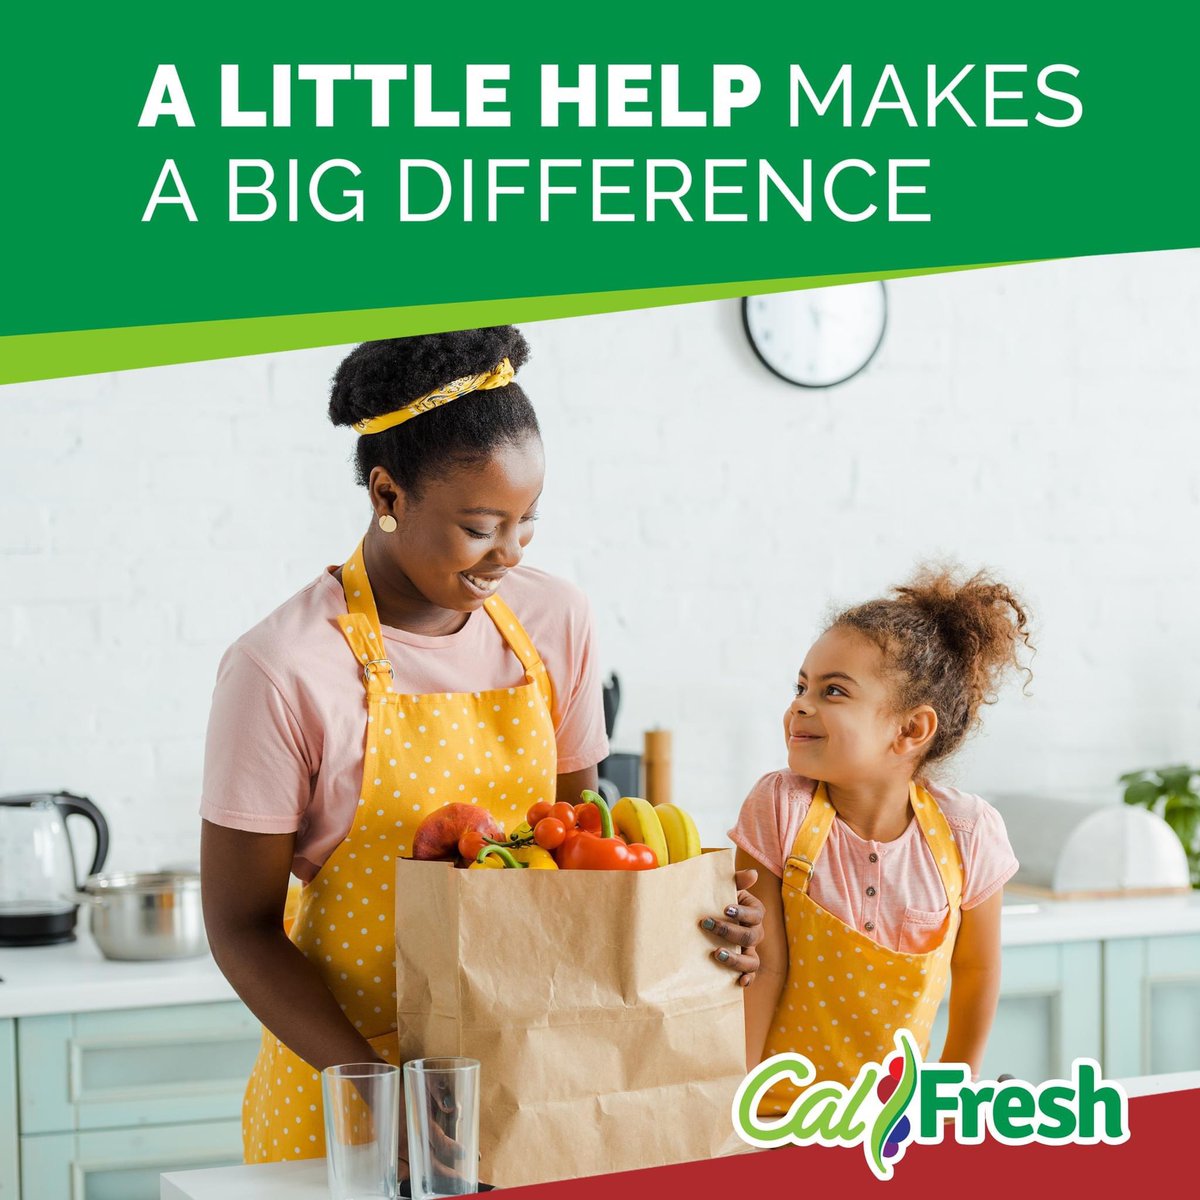 CalFresh Food is money for food. This #CalFreshAwarenessMonth, we're increasing public awareness of this program that can help qualified households and individuals meet their nutritional needs. Call us today to apply or to see if you're eligible: 1-855-494-4658. #ValueCHCs